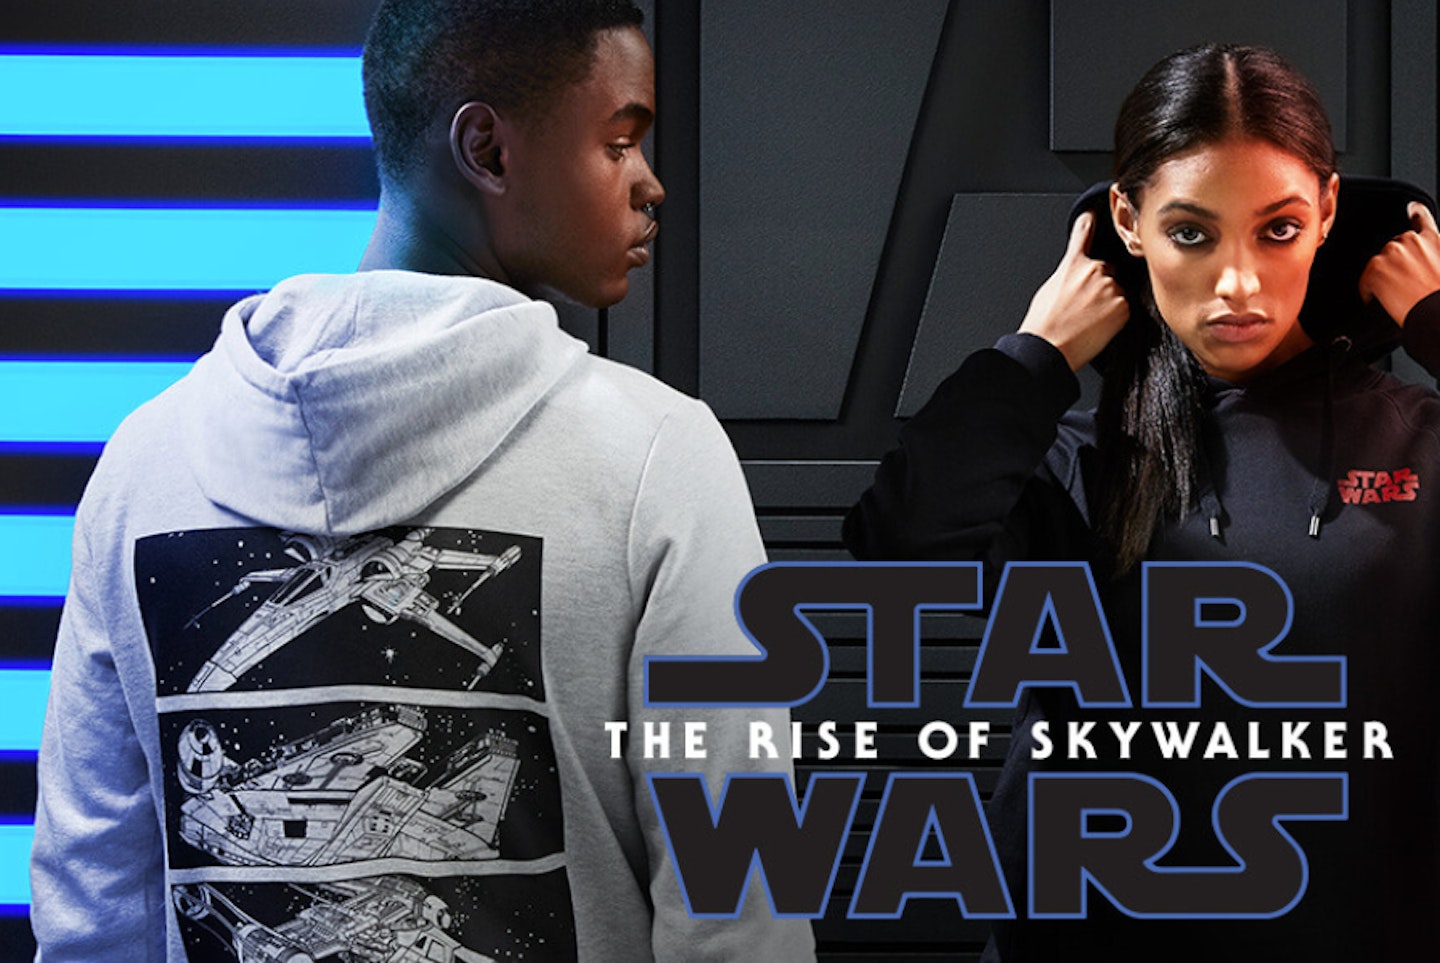 THE RISE OF SKYWALKER CLOTHING